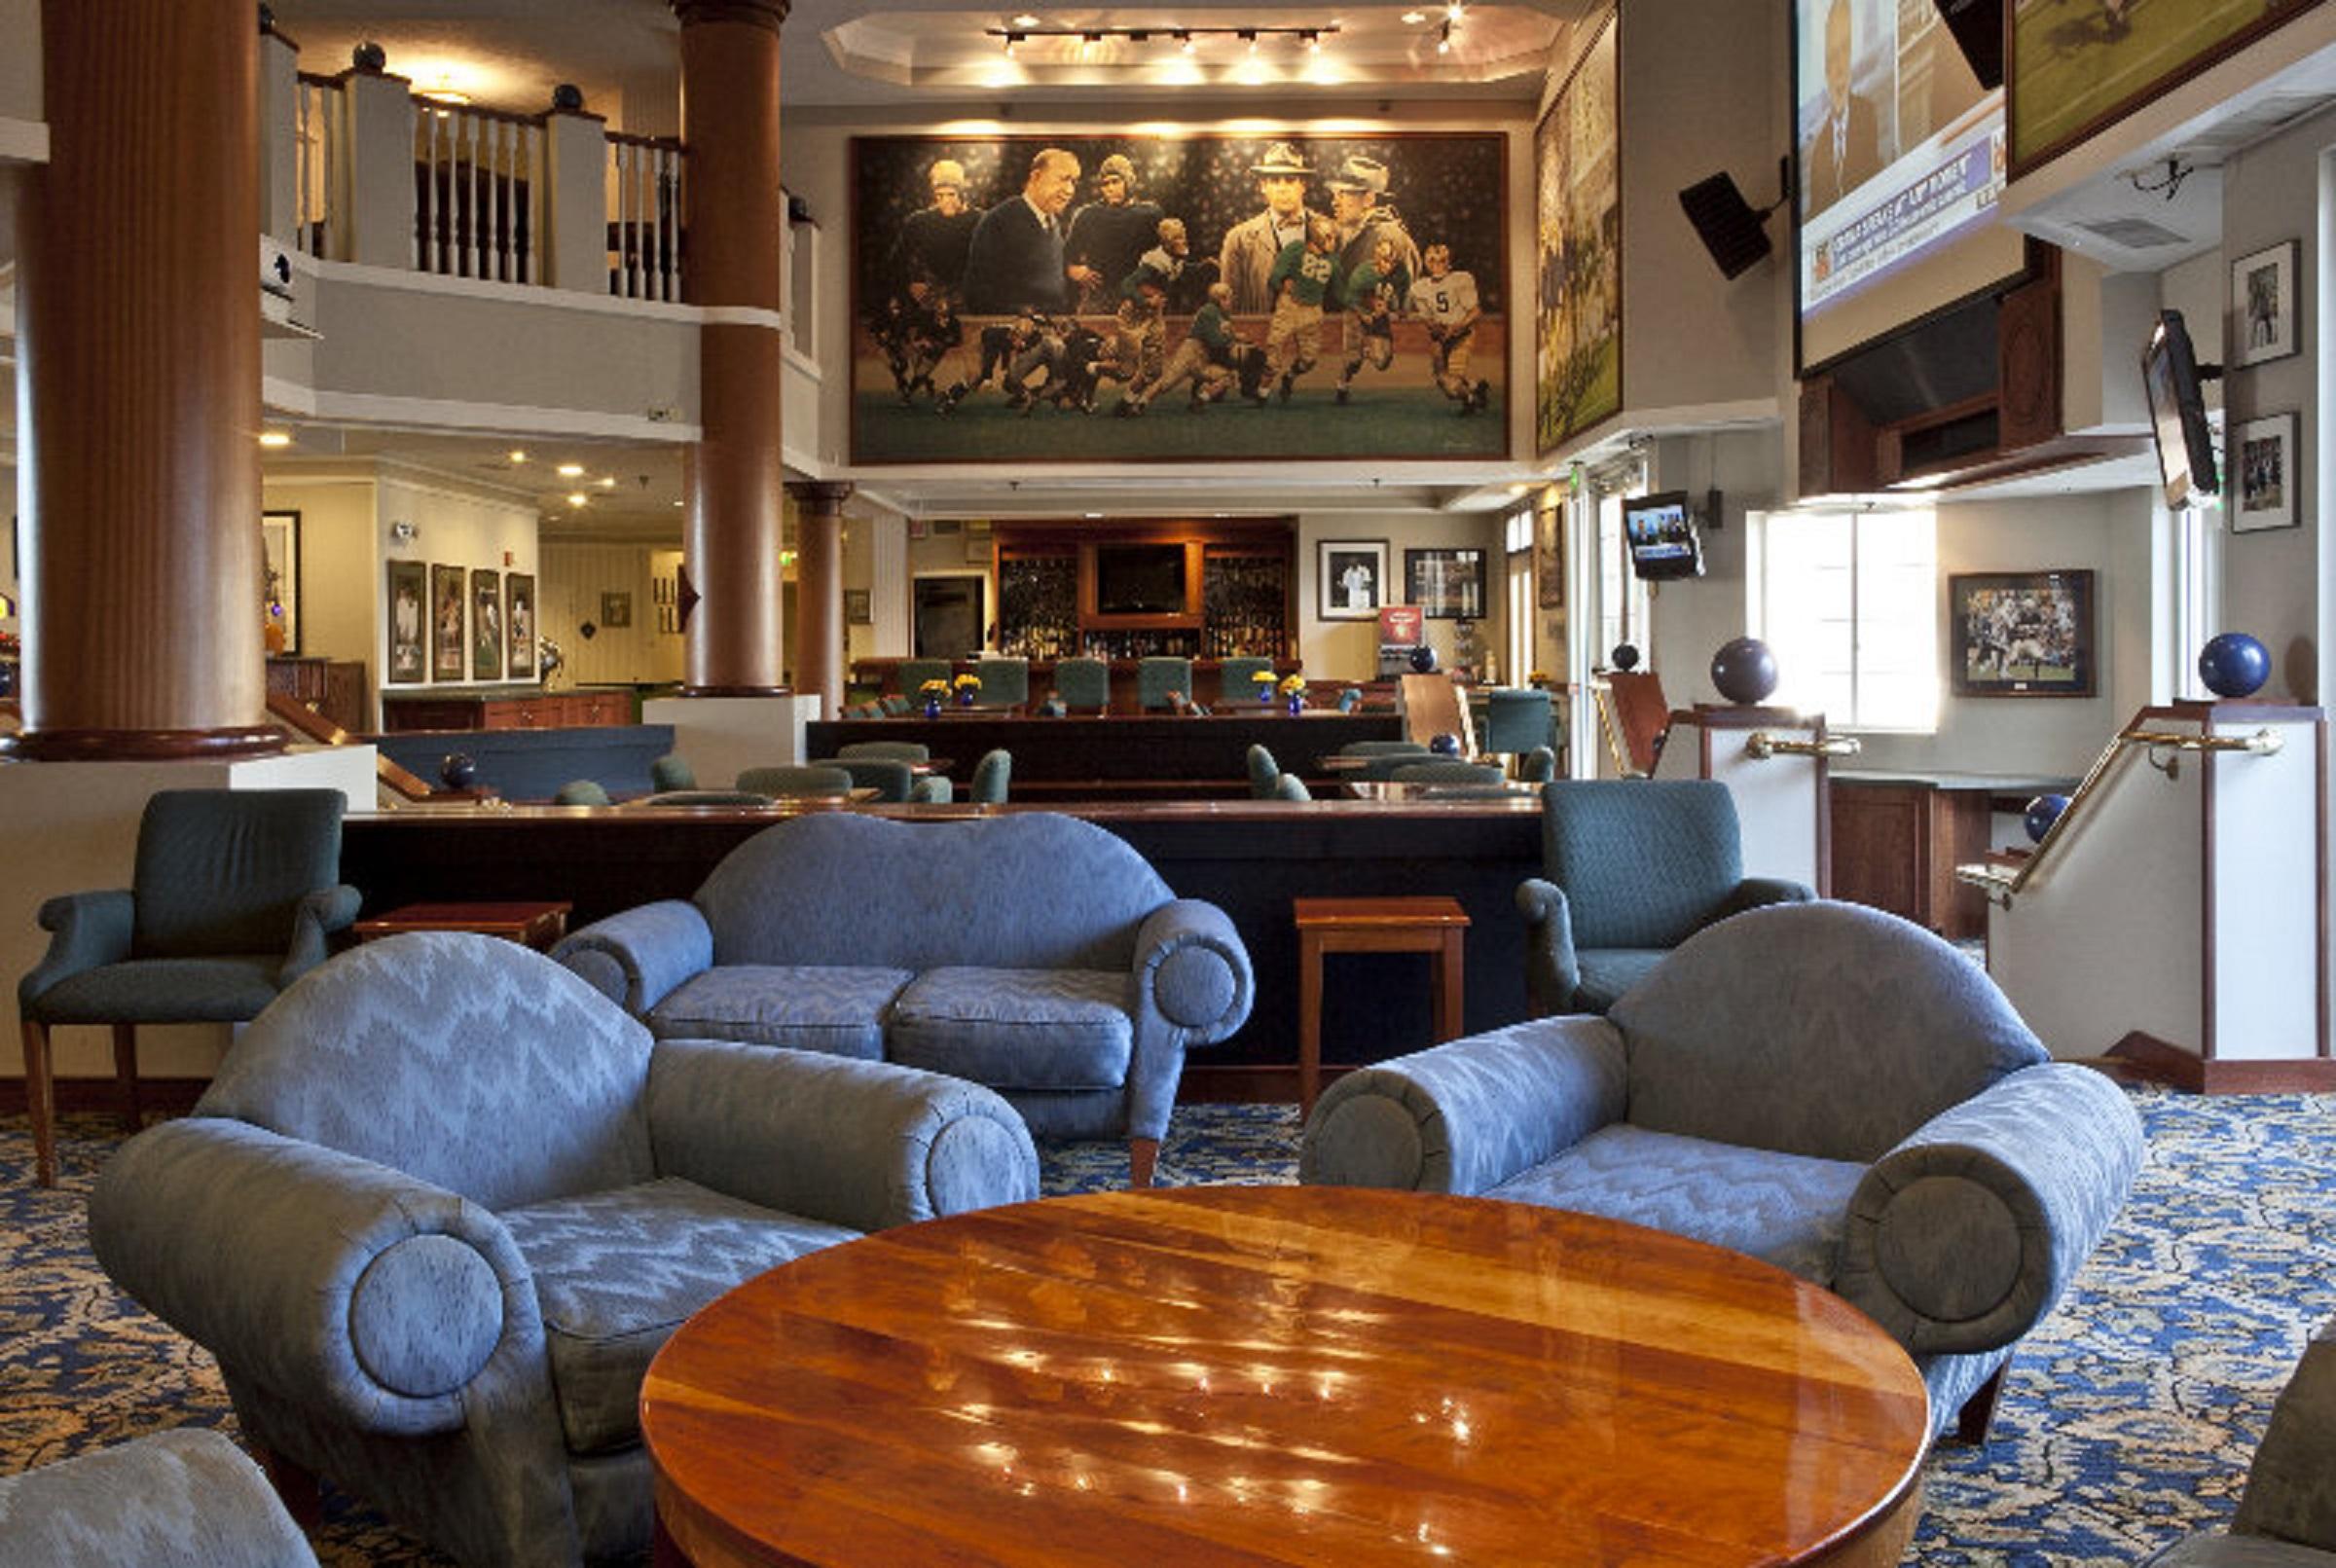 Varsity Clubs Of America South Bend Interieur foto